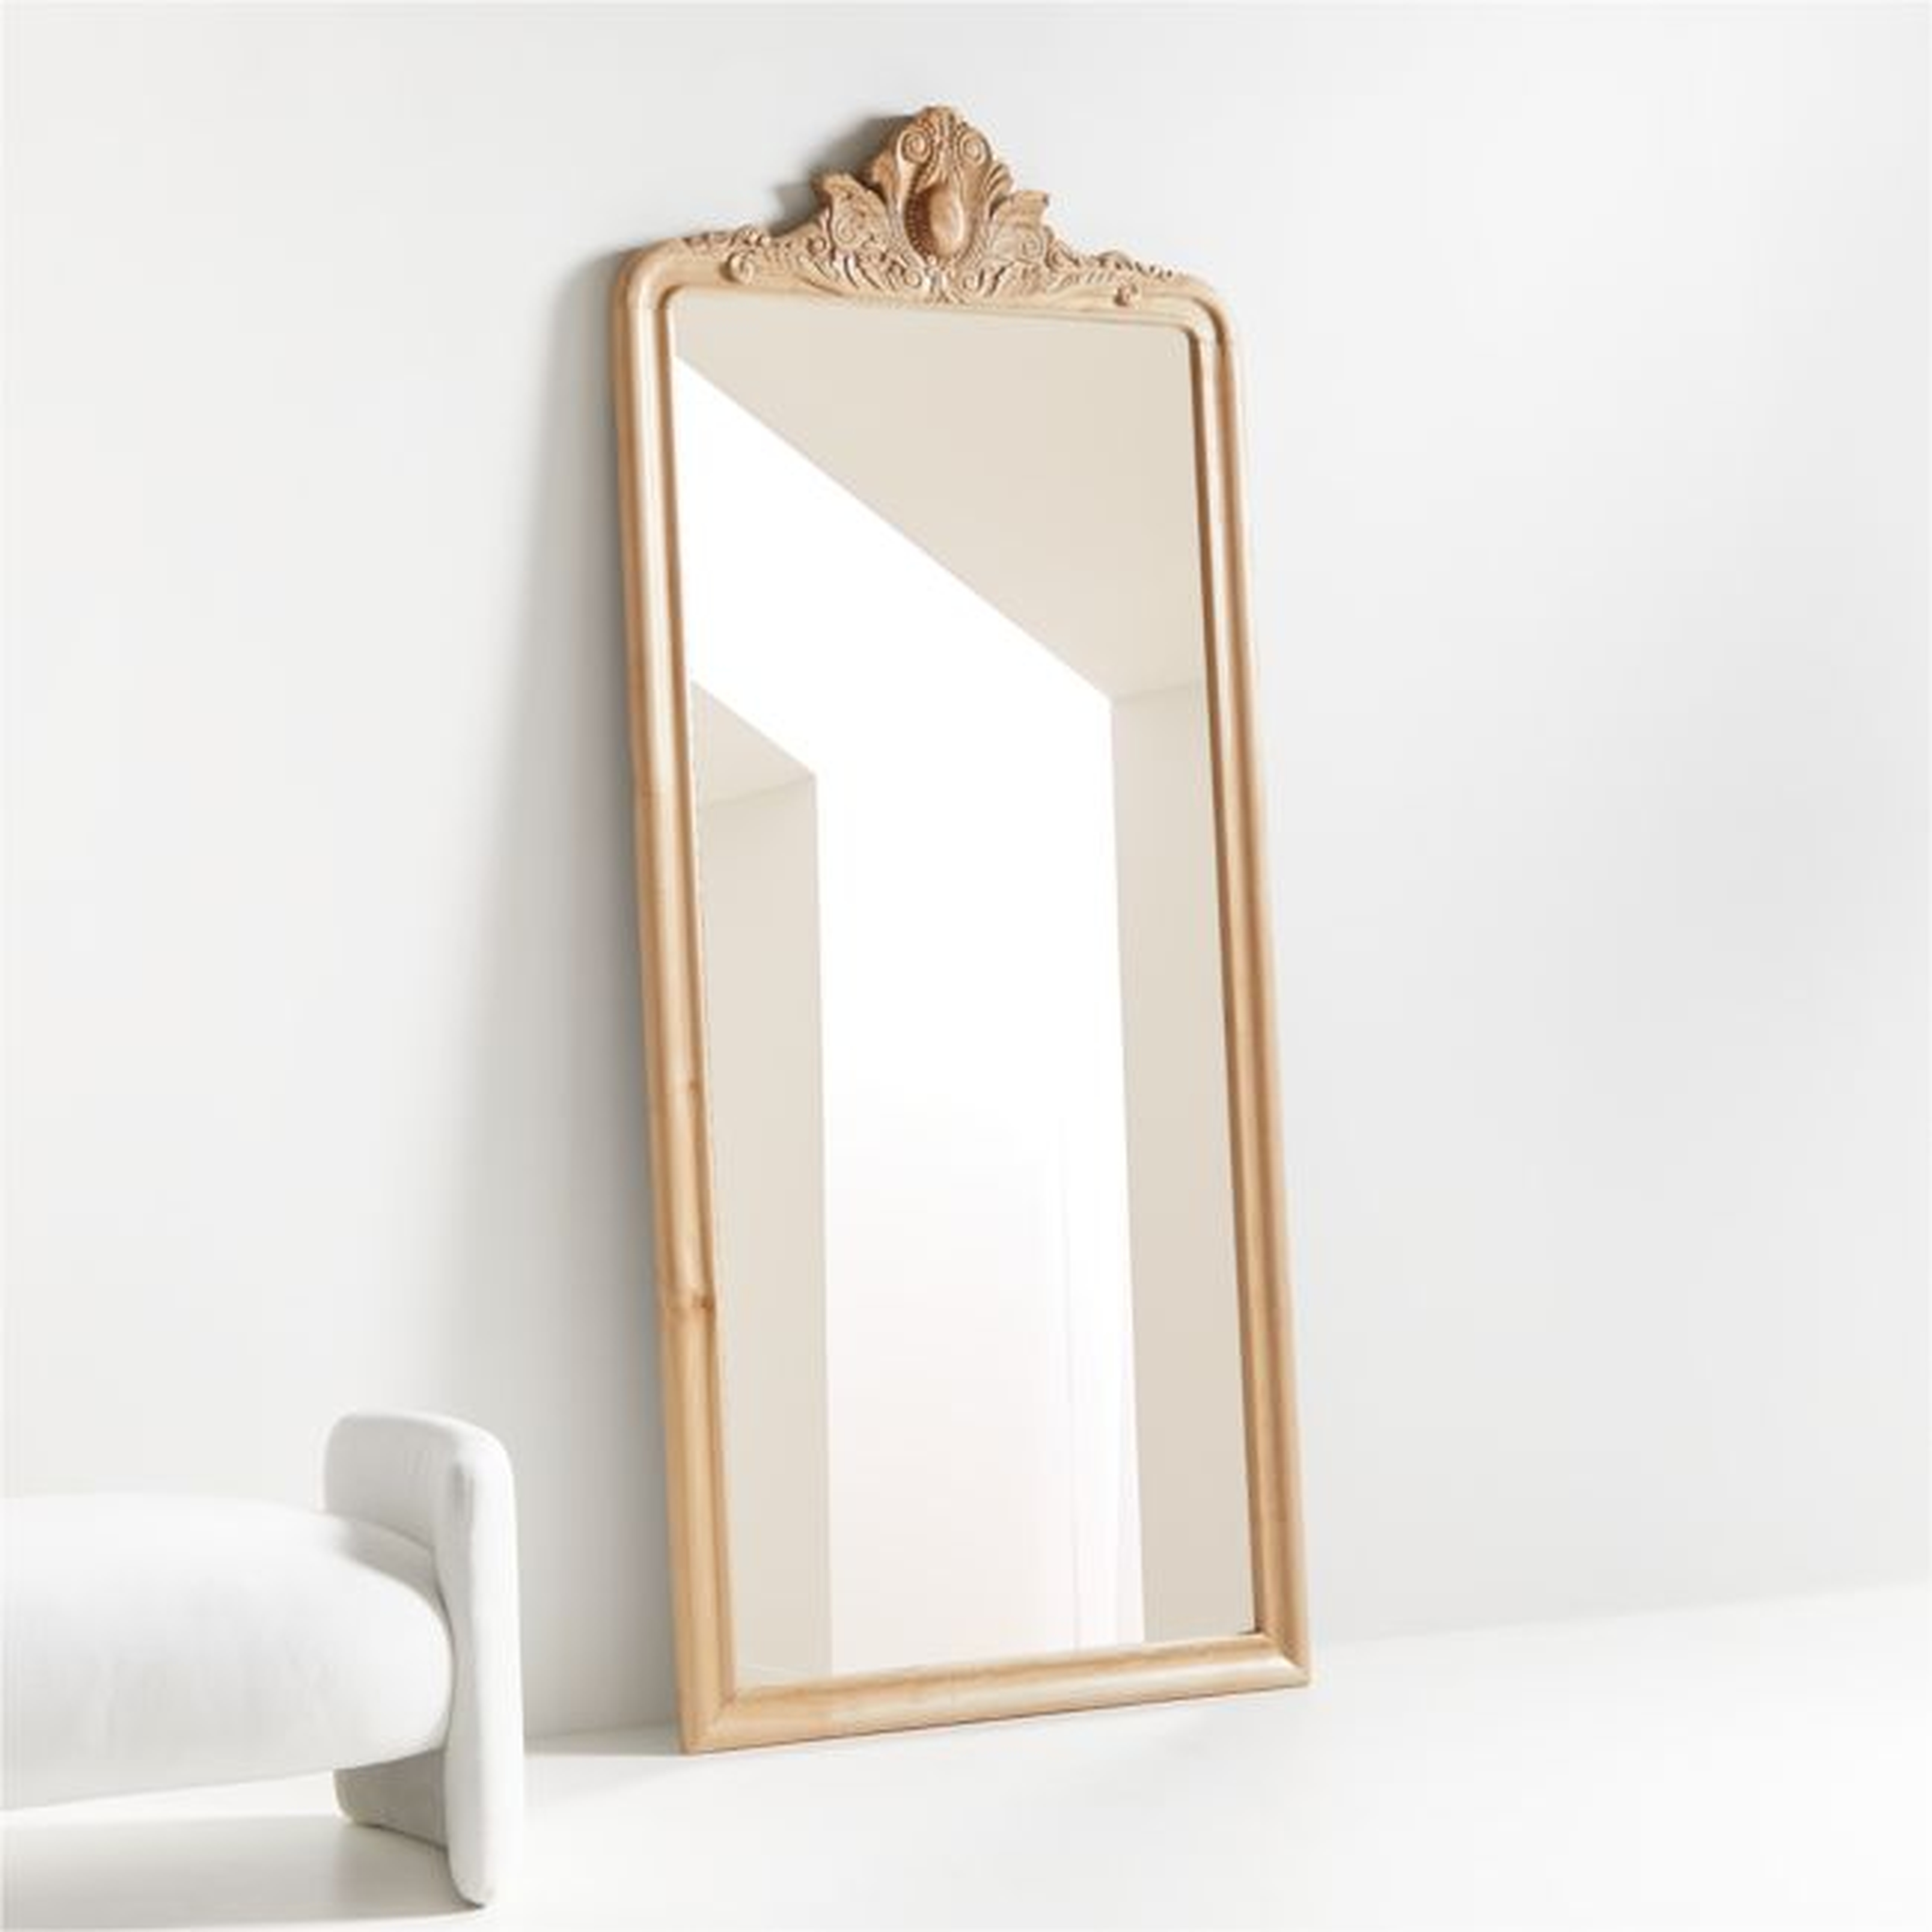 Levon Natural Carved Wood Floor Mirror by Leanne Ford - Crate and Barrel